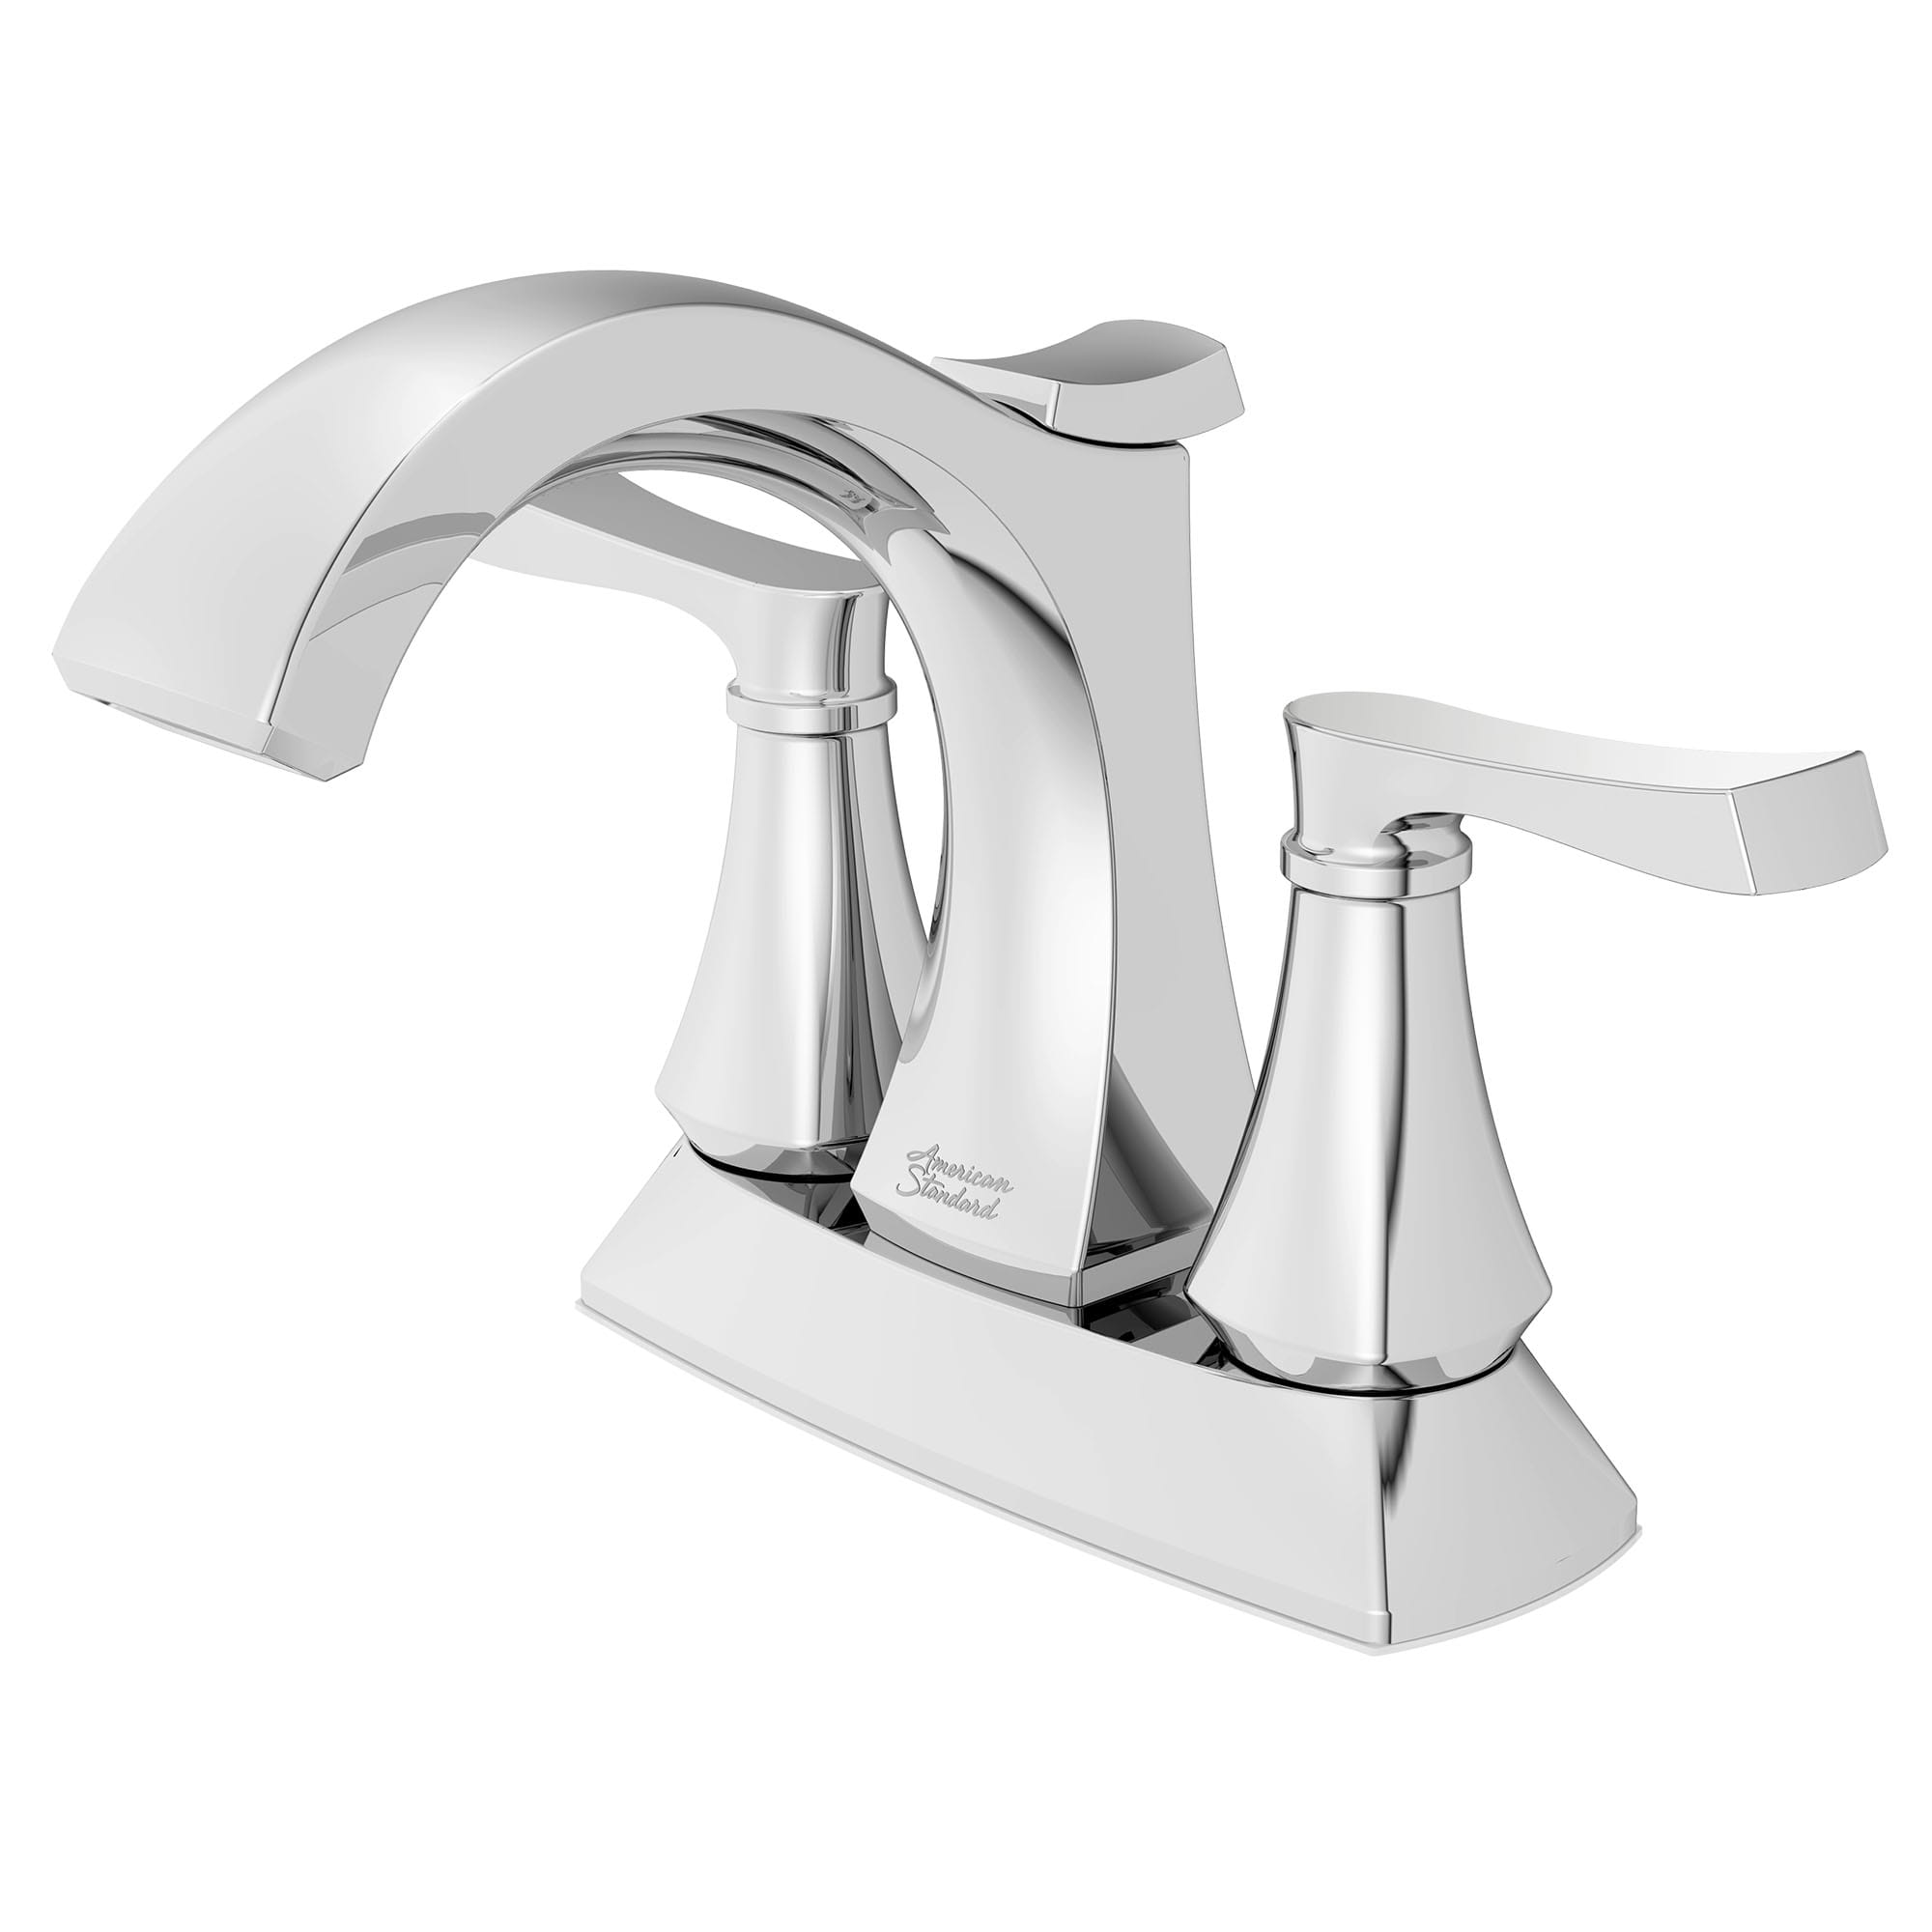 Kaleta 4 In Centerset 2 Handle Bathroom Faucet 15 GPM with Lever Handles CHROME